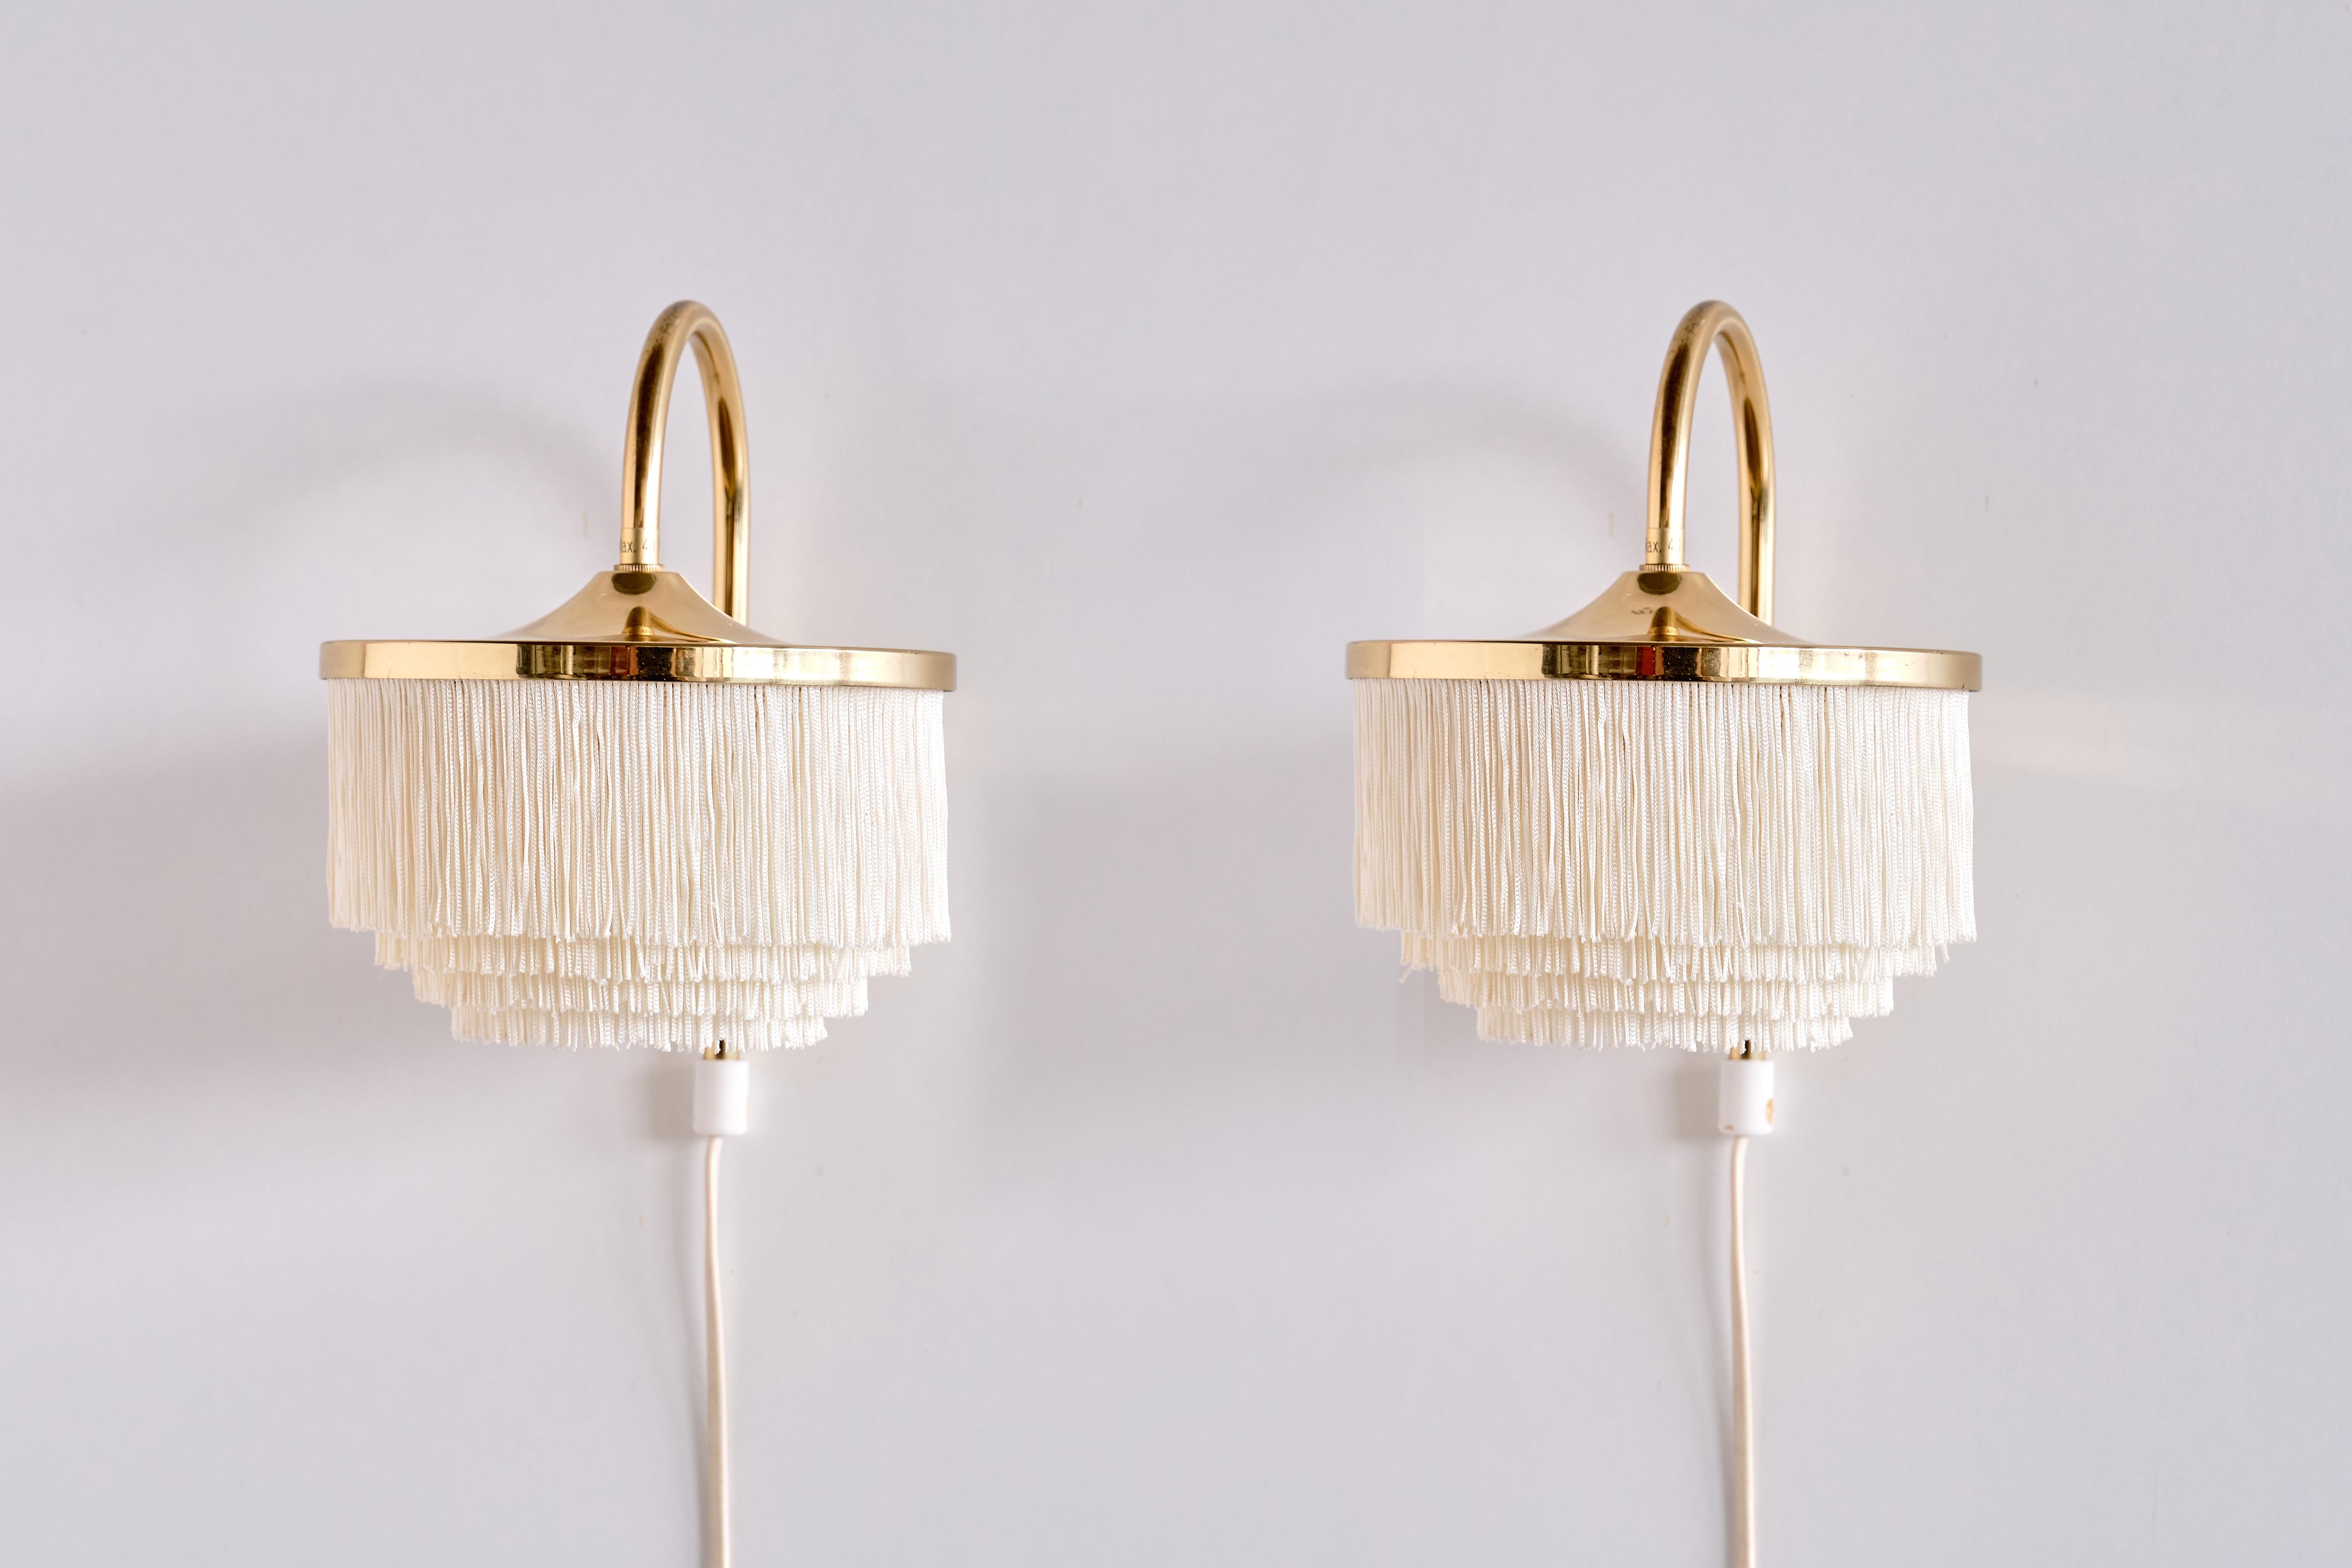 This rare pair of wall lights was designed by Hans-Agne Jakobsson and produced by his company in Markaryd, Sweden in the 1960s. The model is numbered V-271. The lamp consists of a circular brass fixture with four layers of white fringes. Both lamps